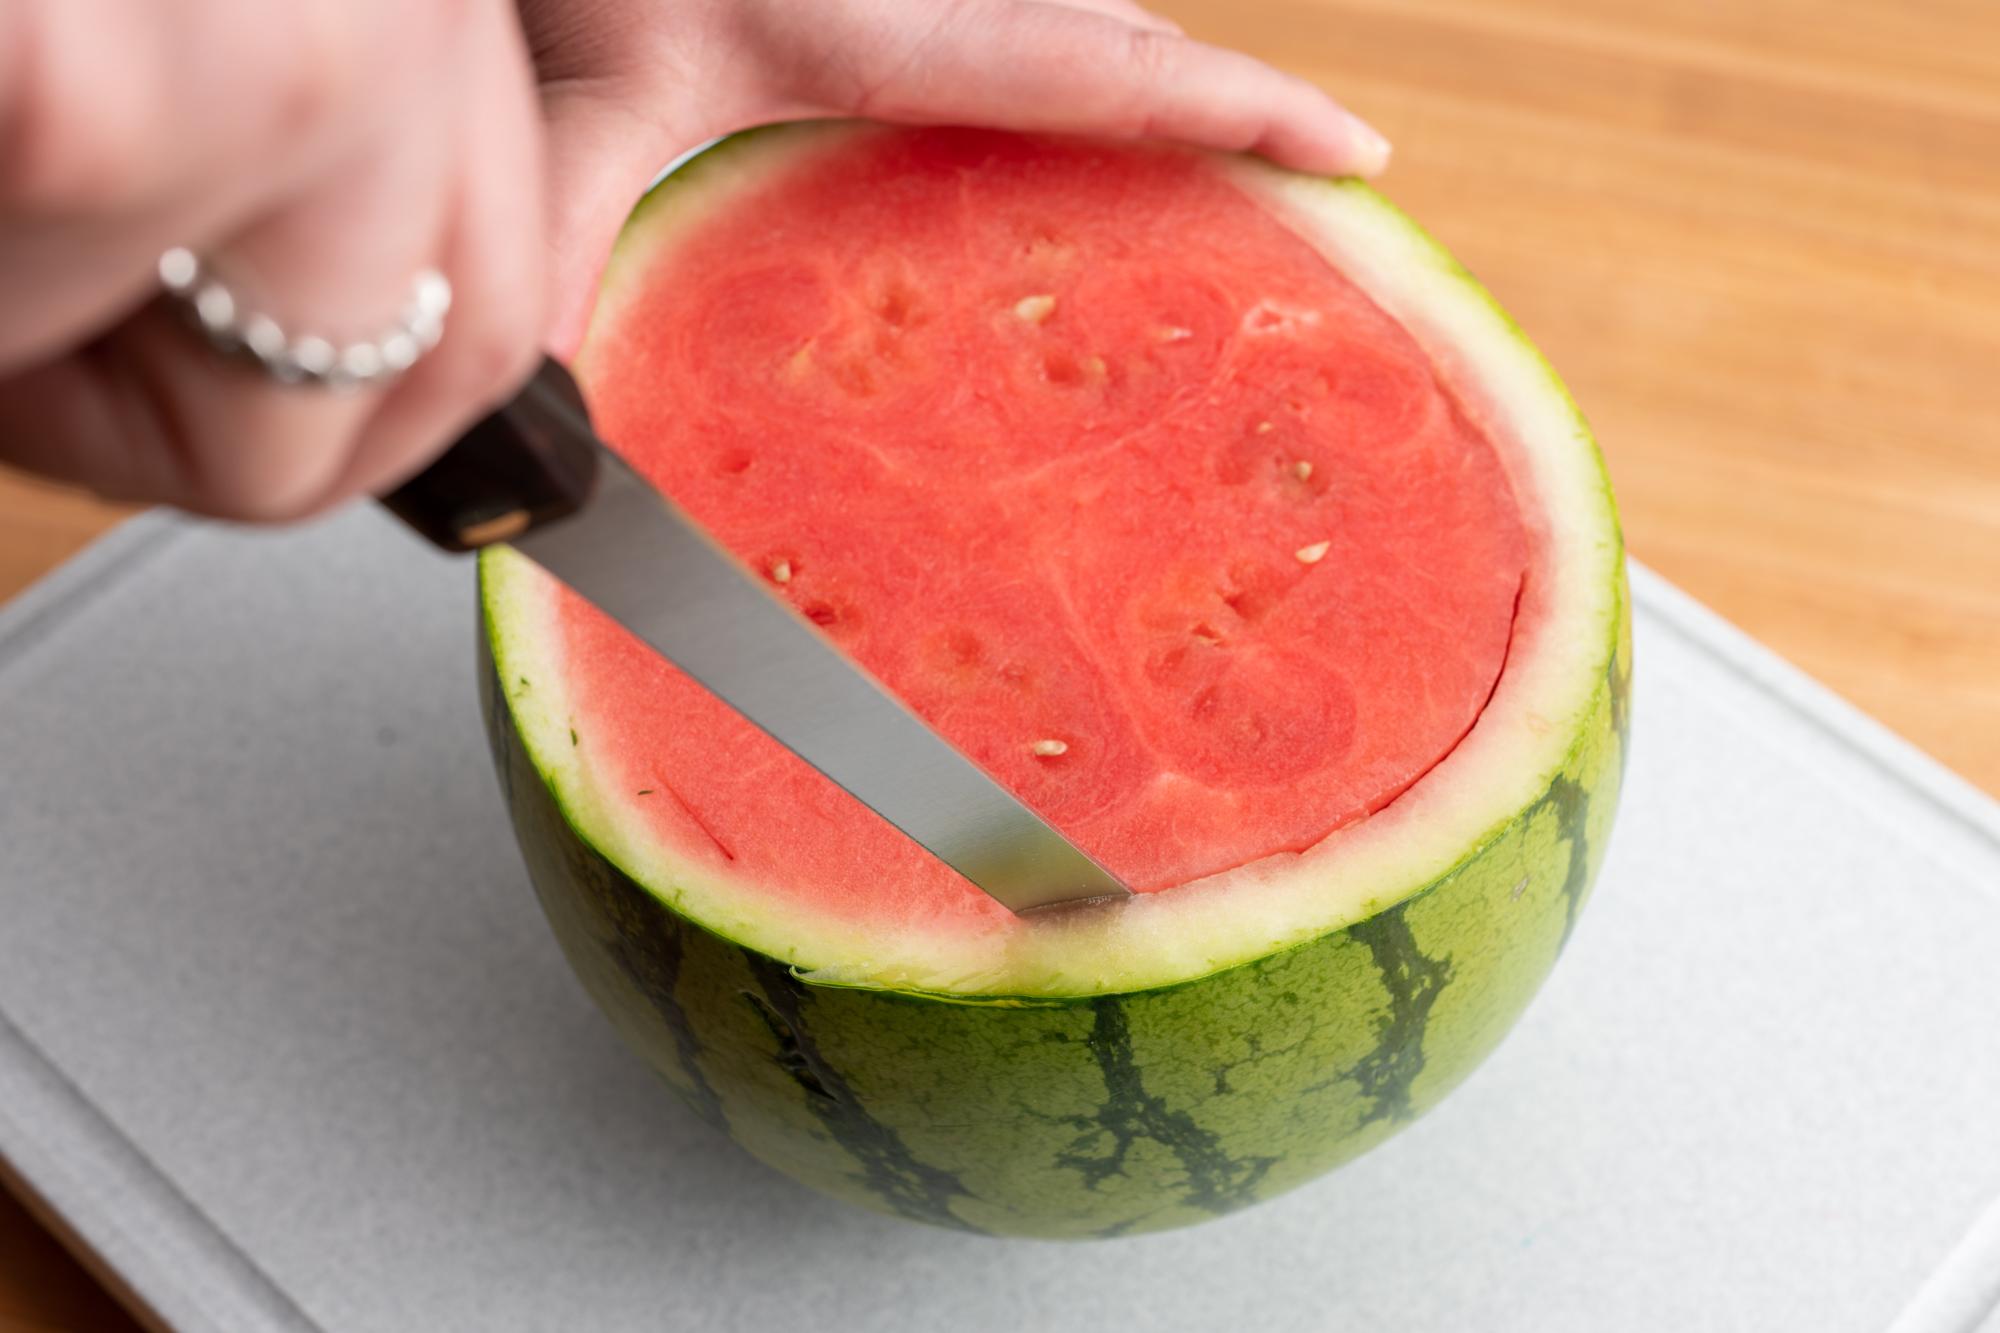 Using a Salmon knife to cut around the inside of the watermelon.